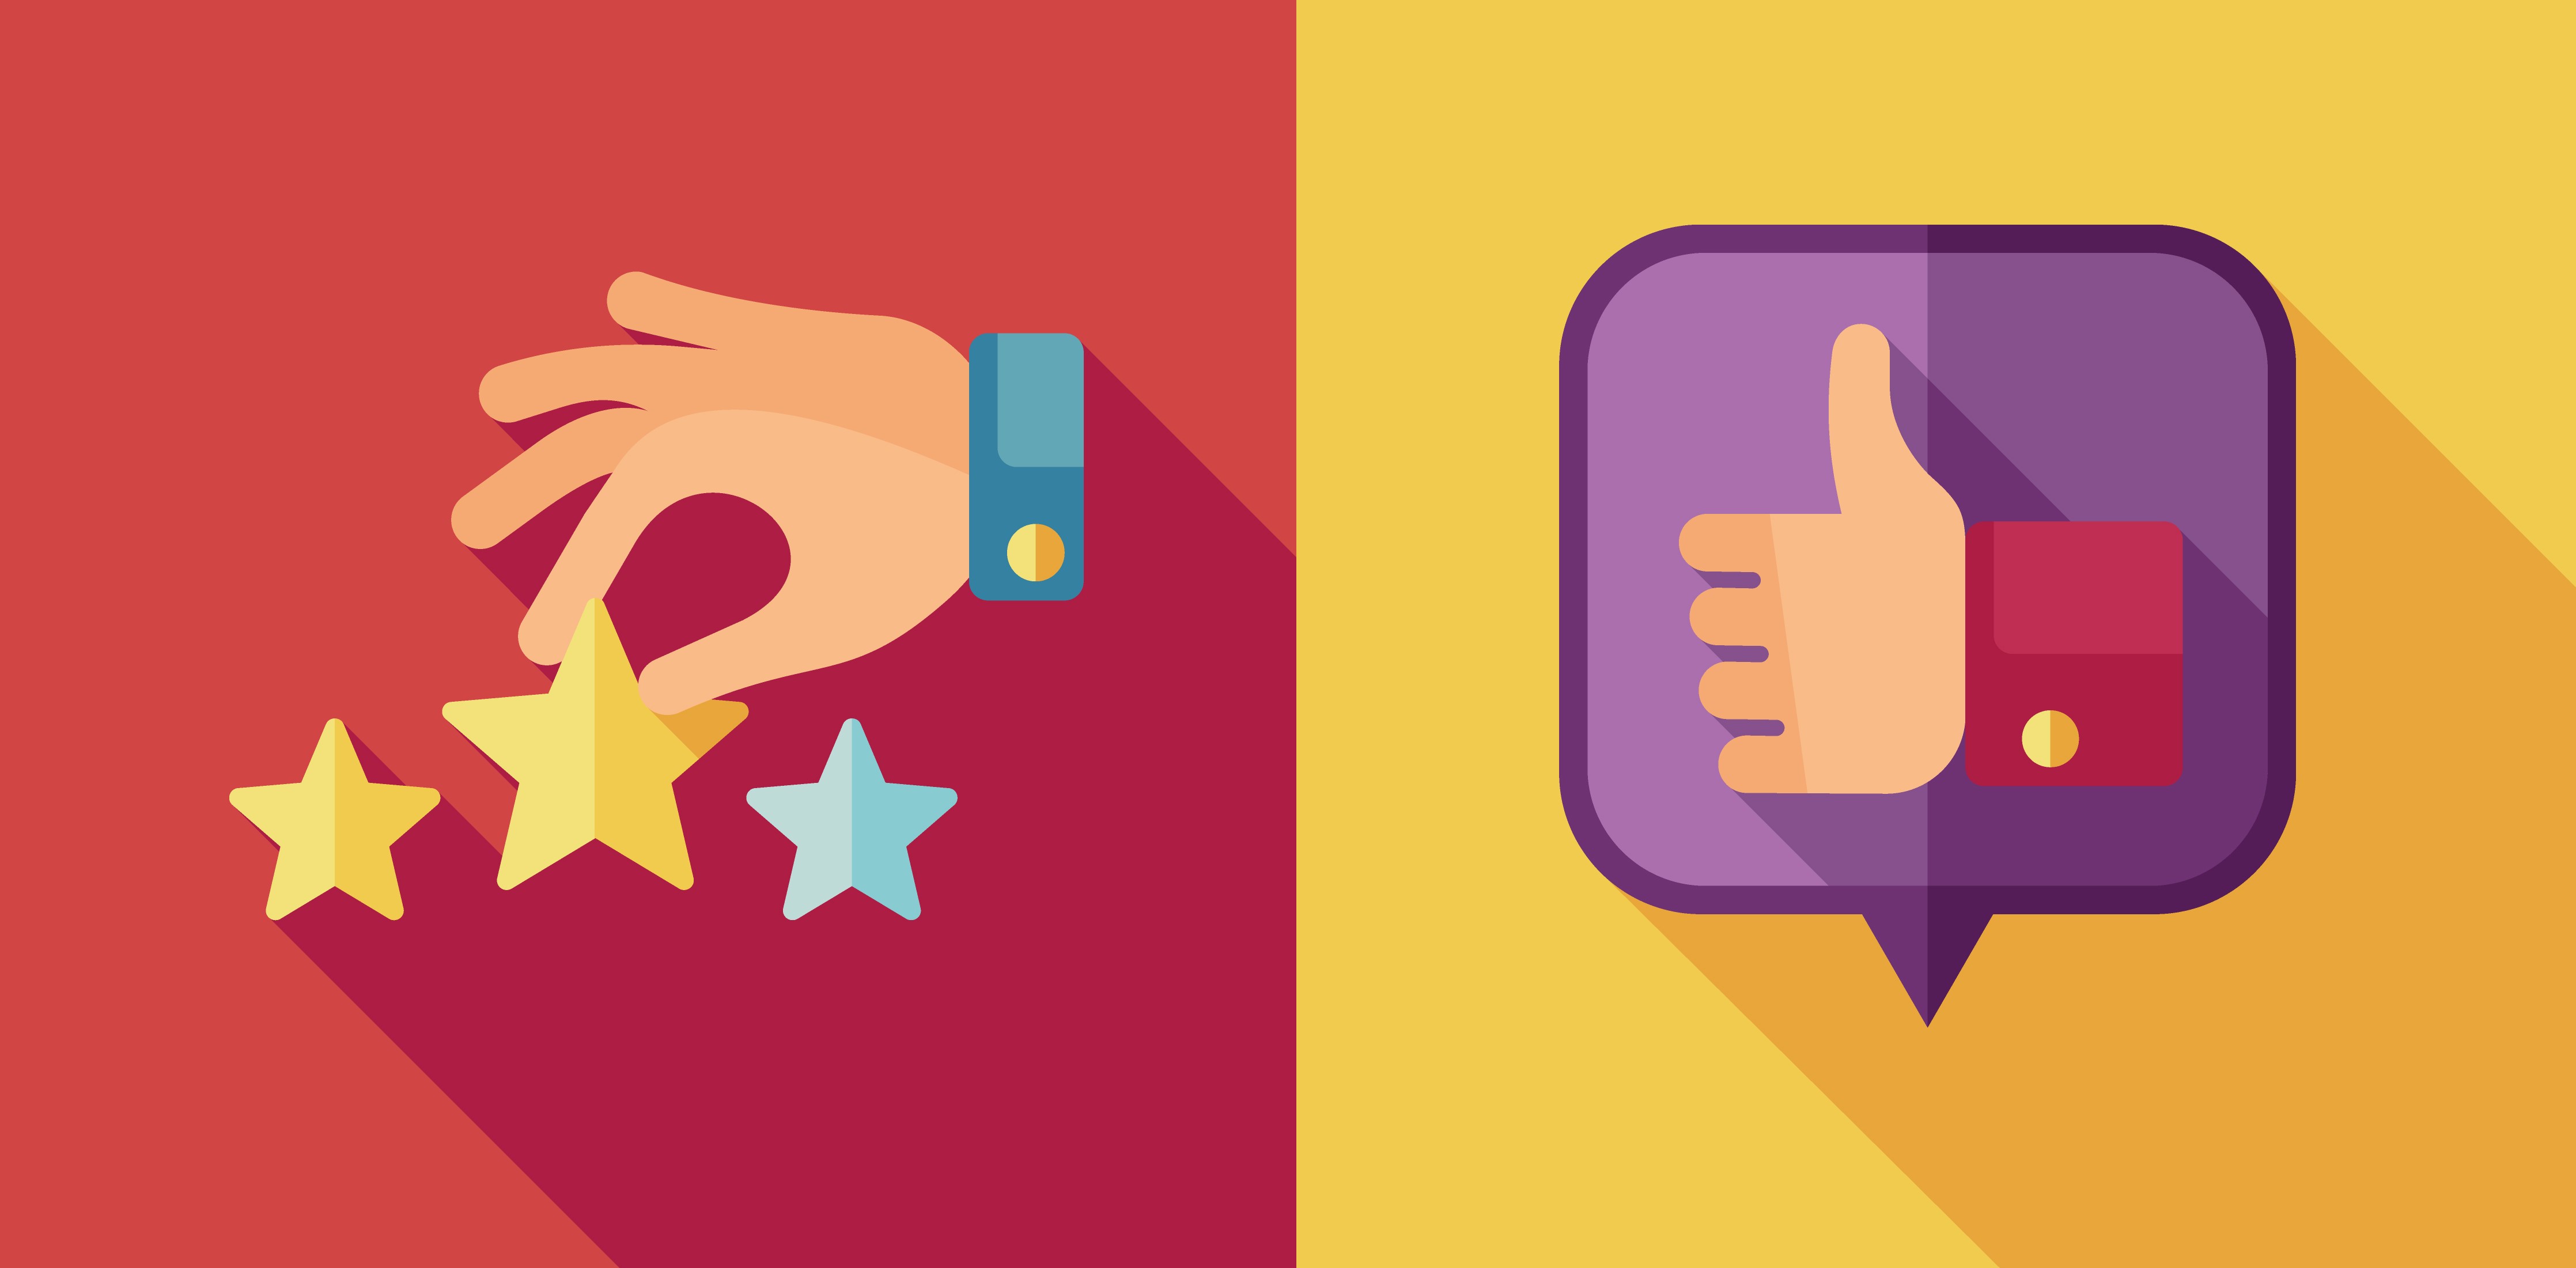 Thumbs up and star ratings illustration